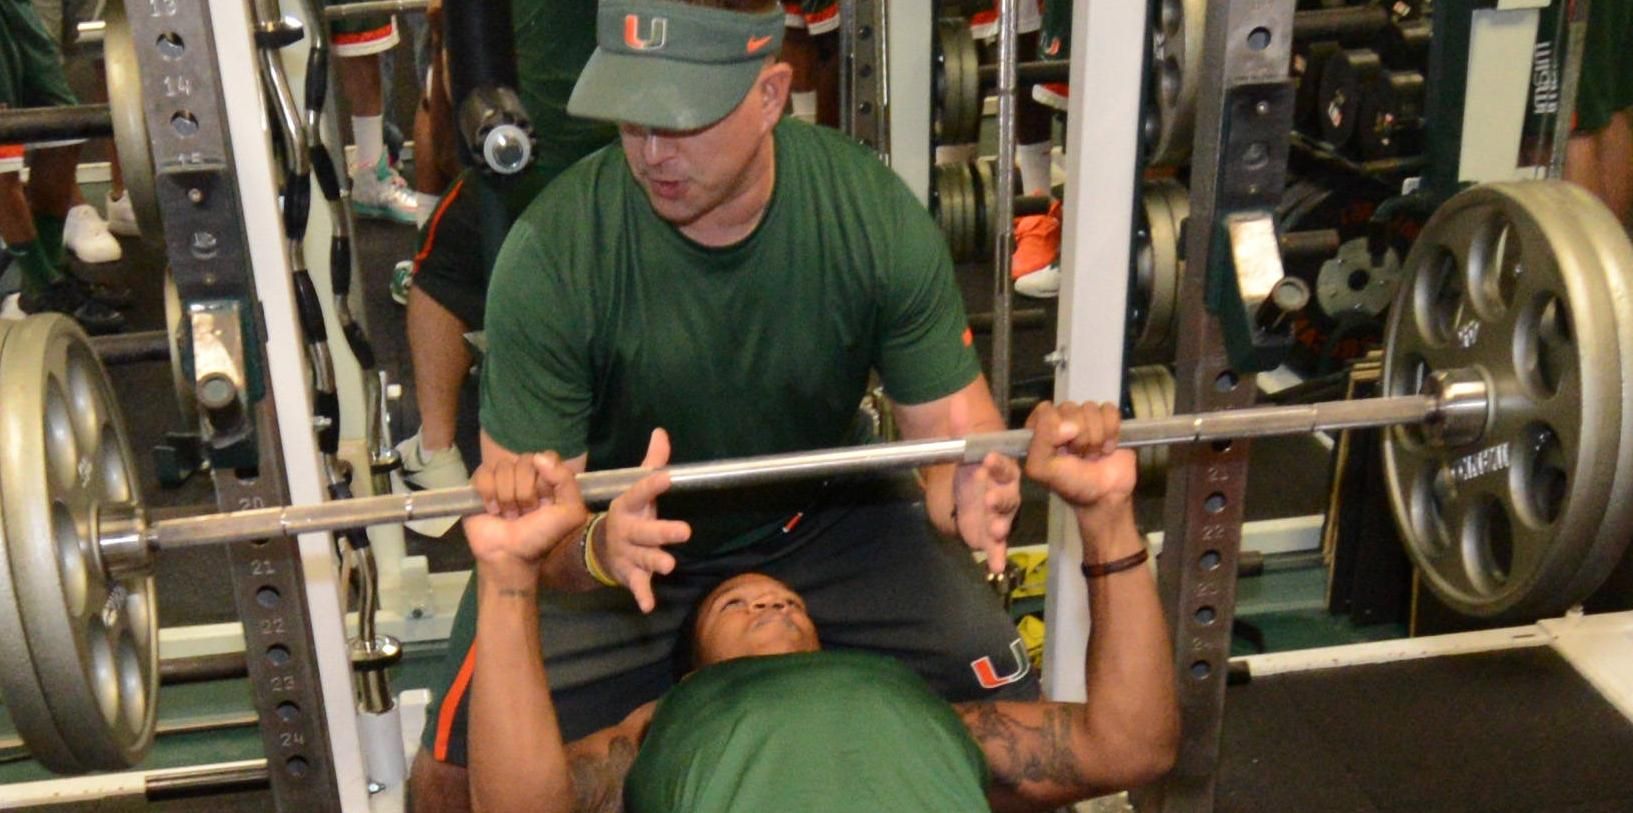 Cane Strong: UMBB in the Weight Room